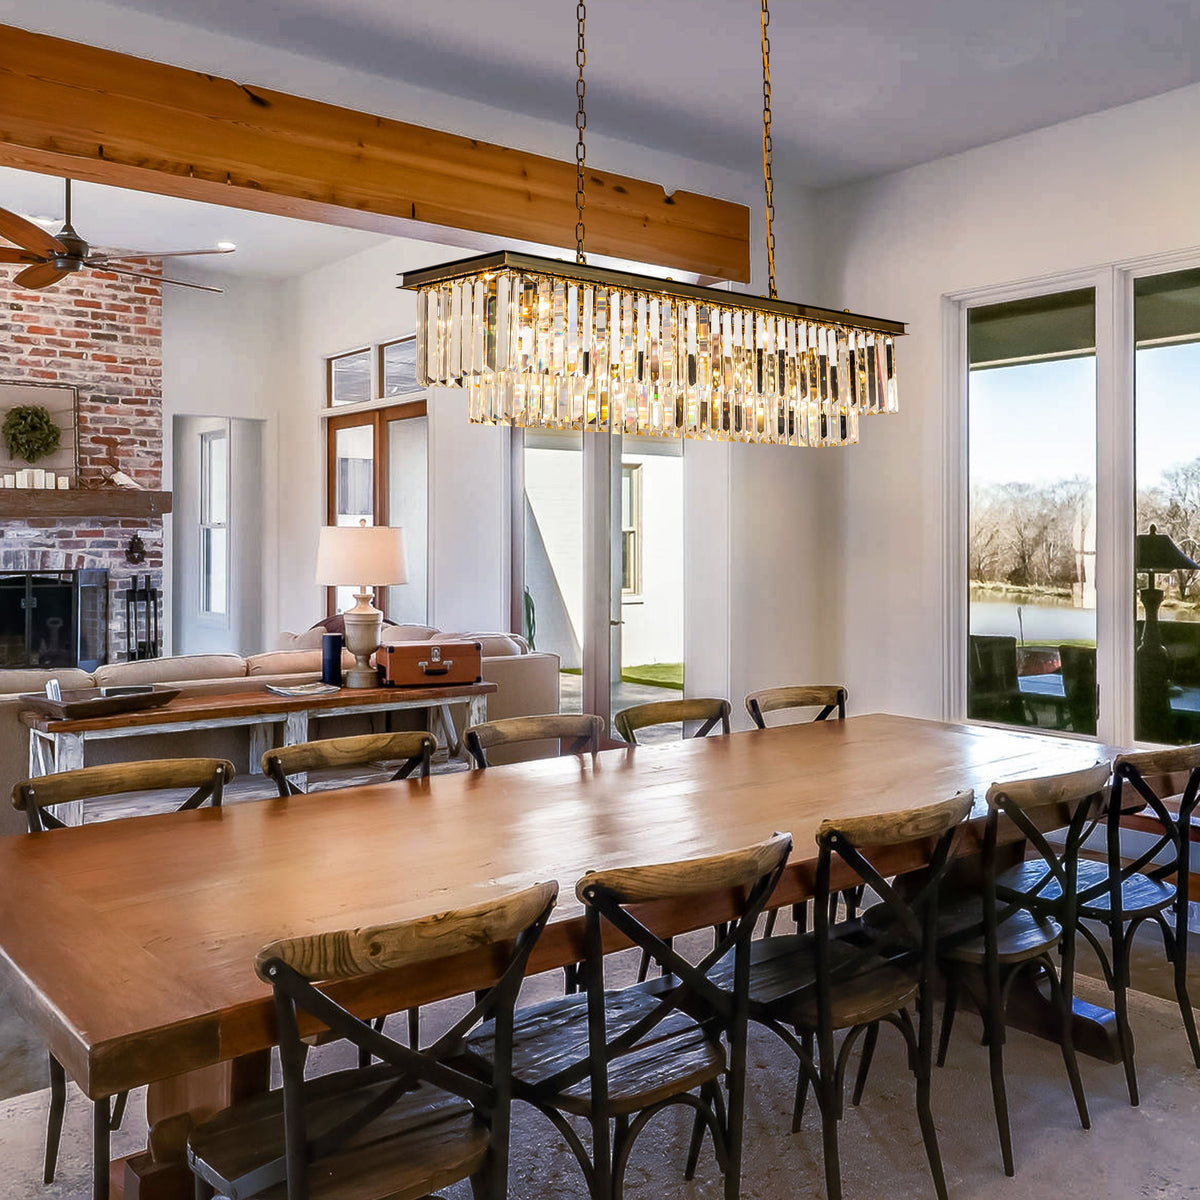 Contemporary Crystal Chandelier for Dining Room